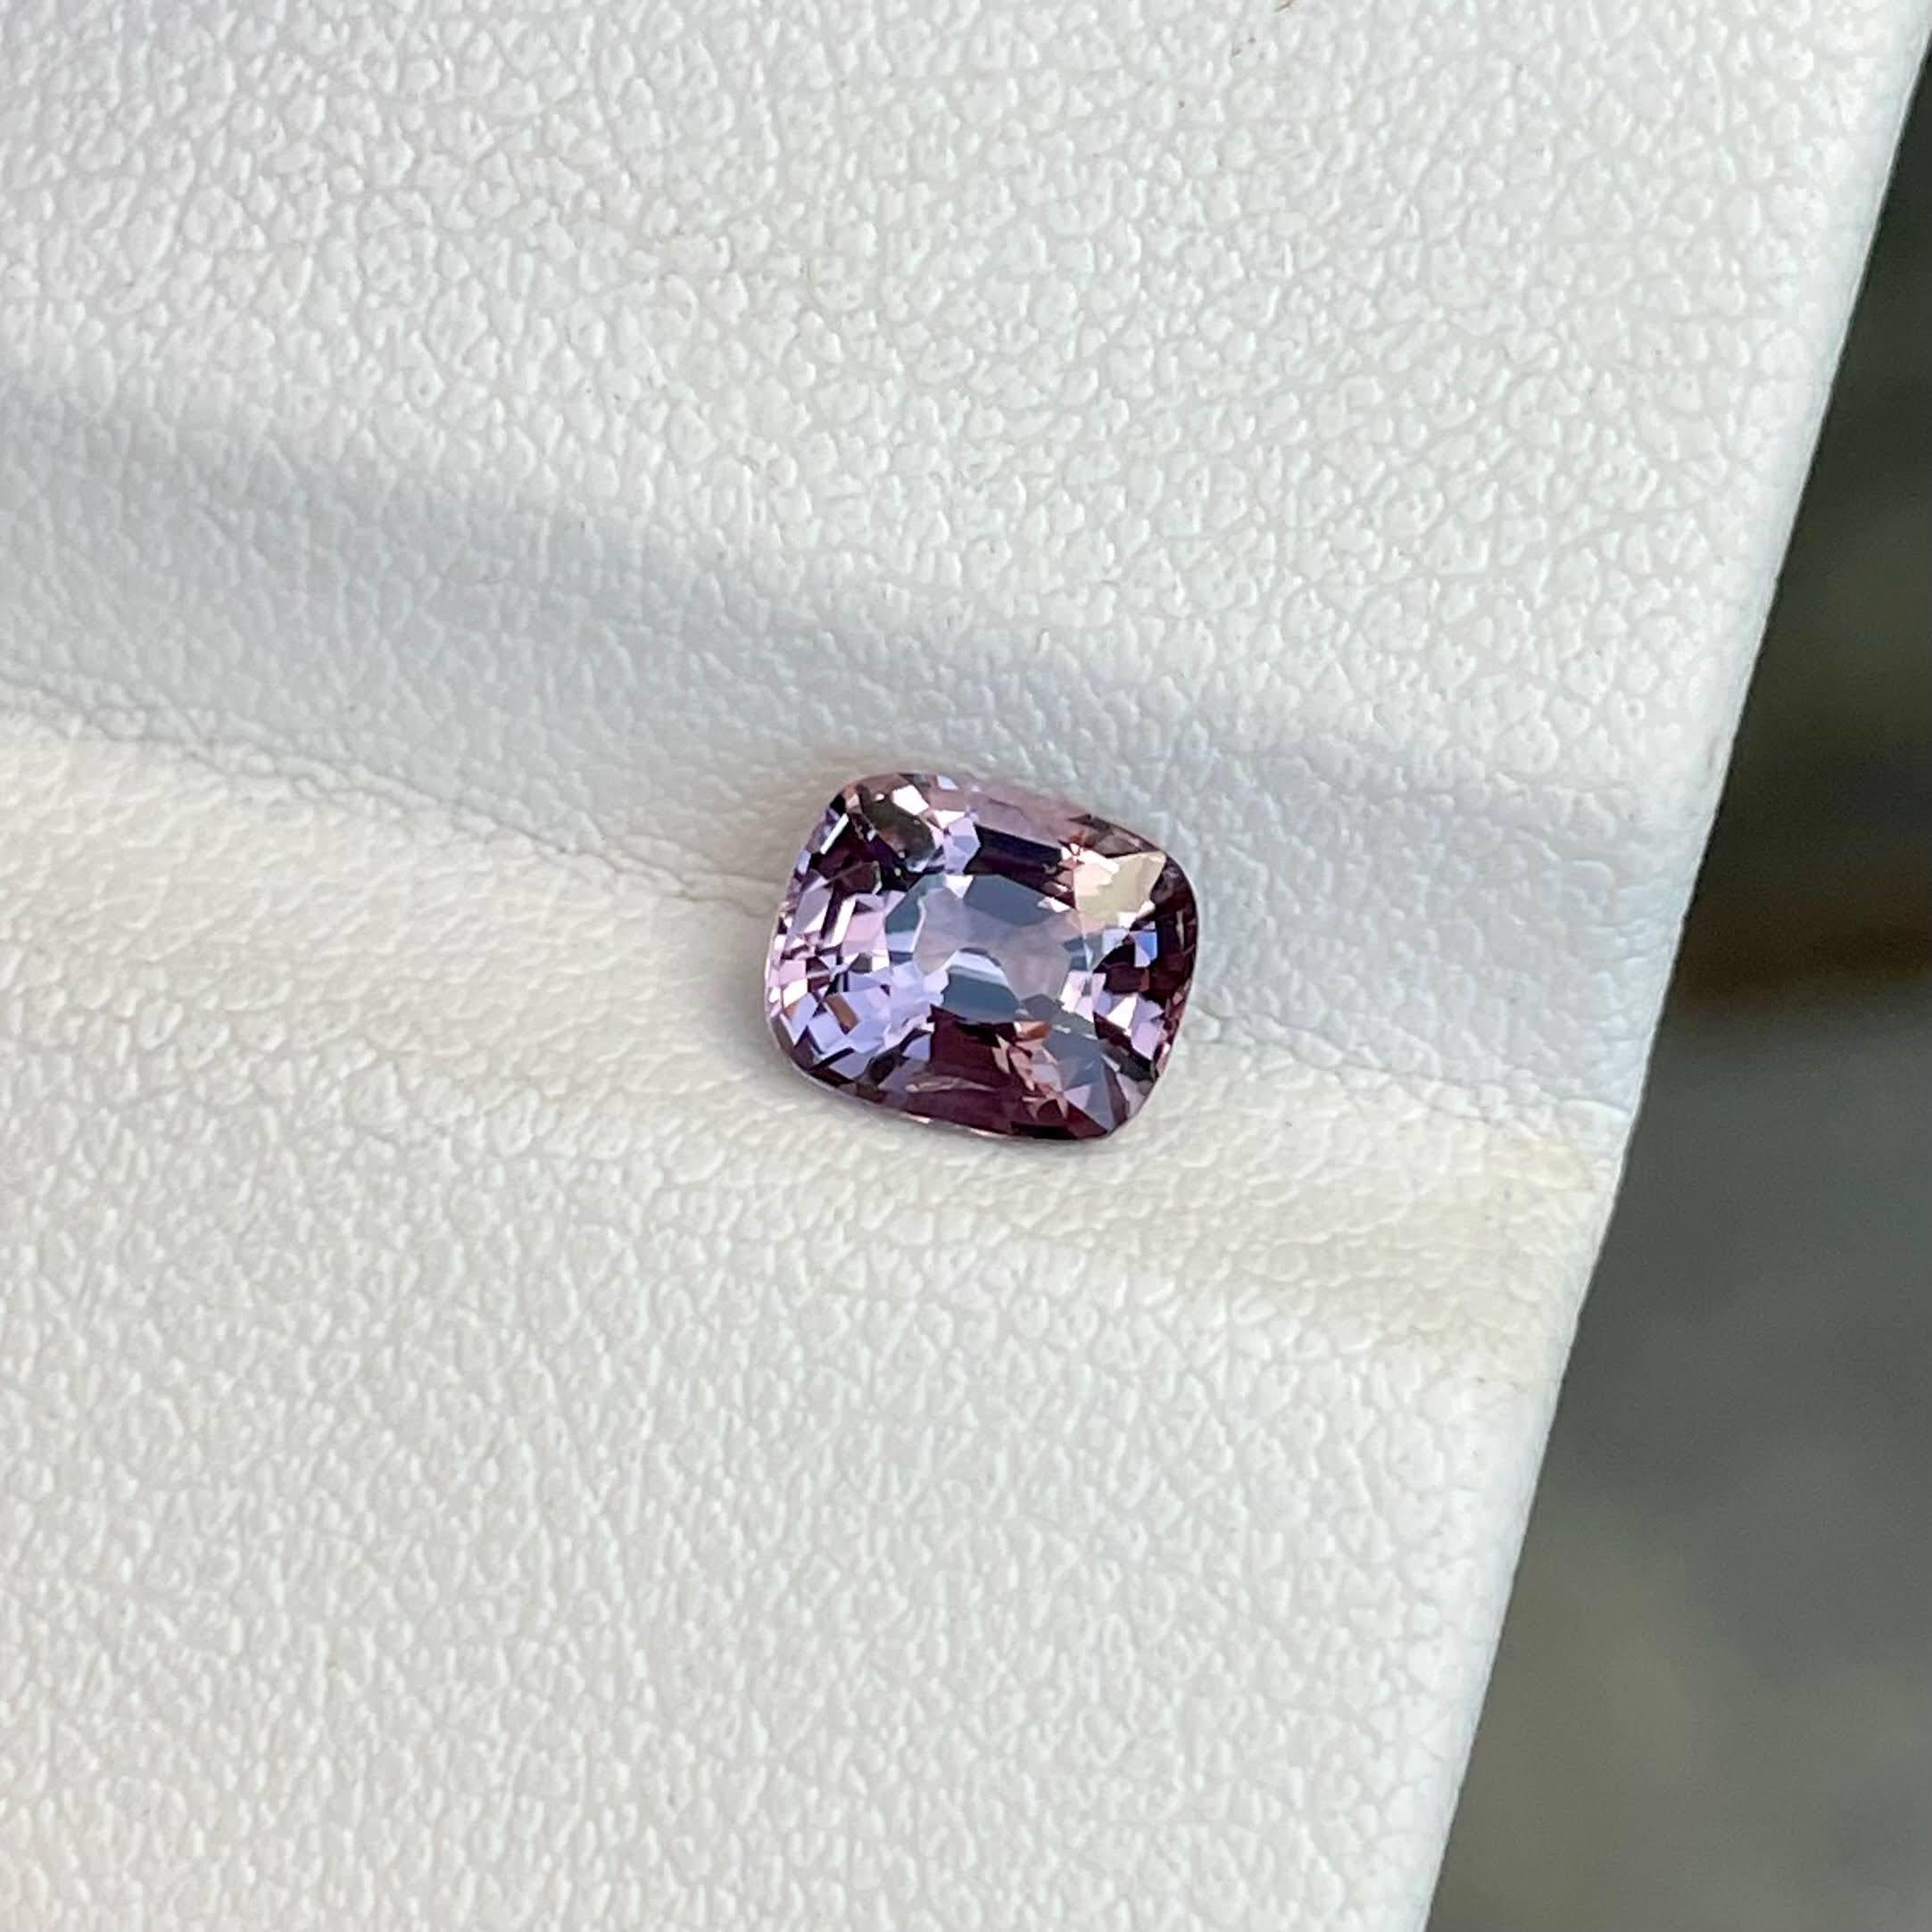 Weight 1.15 carats 
Dimensions 6.75x5.60x3.9 mm
Treatment none 
Origin Burma 
Clarity VVS
Shape cushion 
Cut fancy cushion 



The 1.15 carats Grayish Purple Burmese Spinel Stone is a captivating natural gemstone renowned for its elegant beauty and